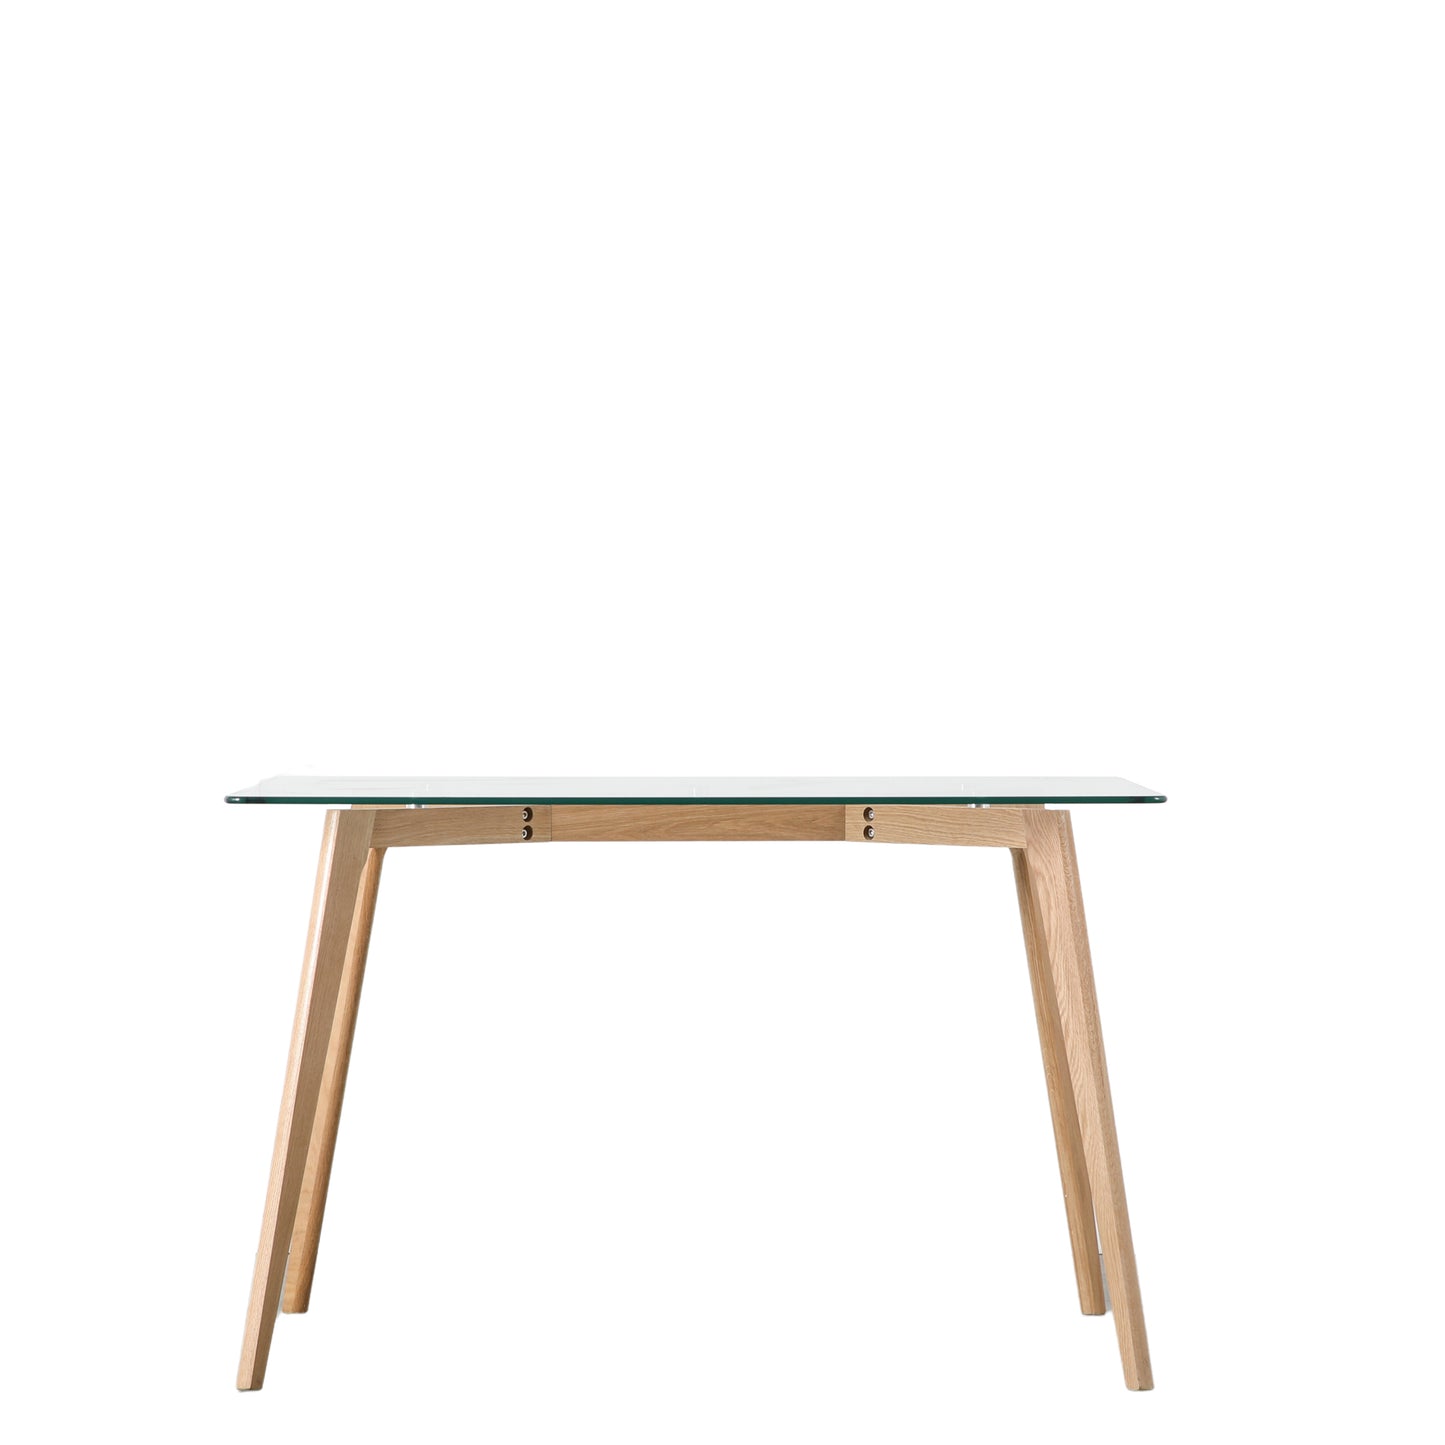 A home furniture piece, the Kikiathome.co.uk Ashprington Rectangle Dining Table Oak 1200x800x750mm, features a glass top and wooden legs for interior decor.